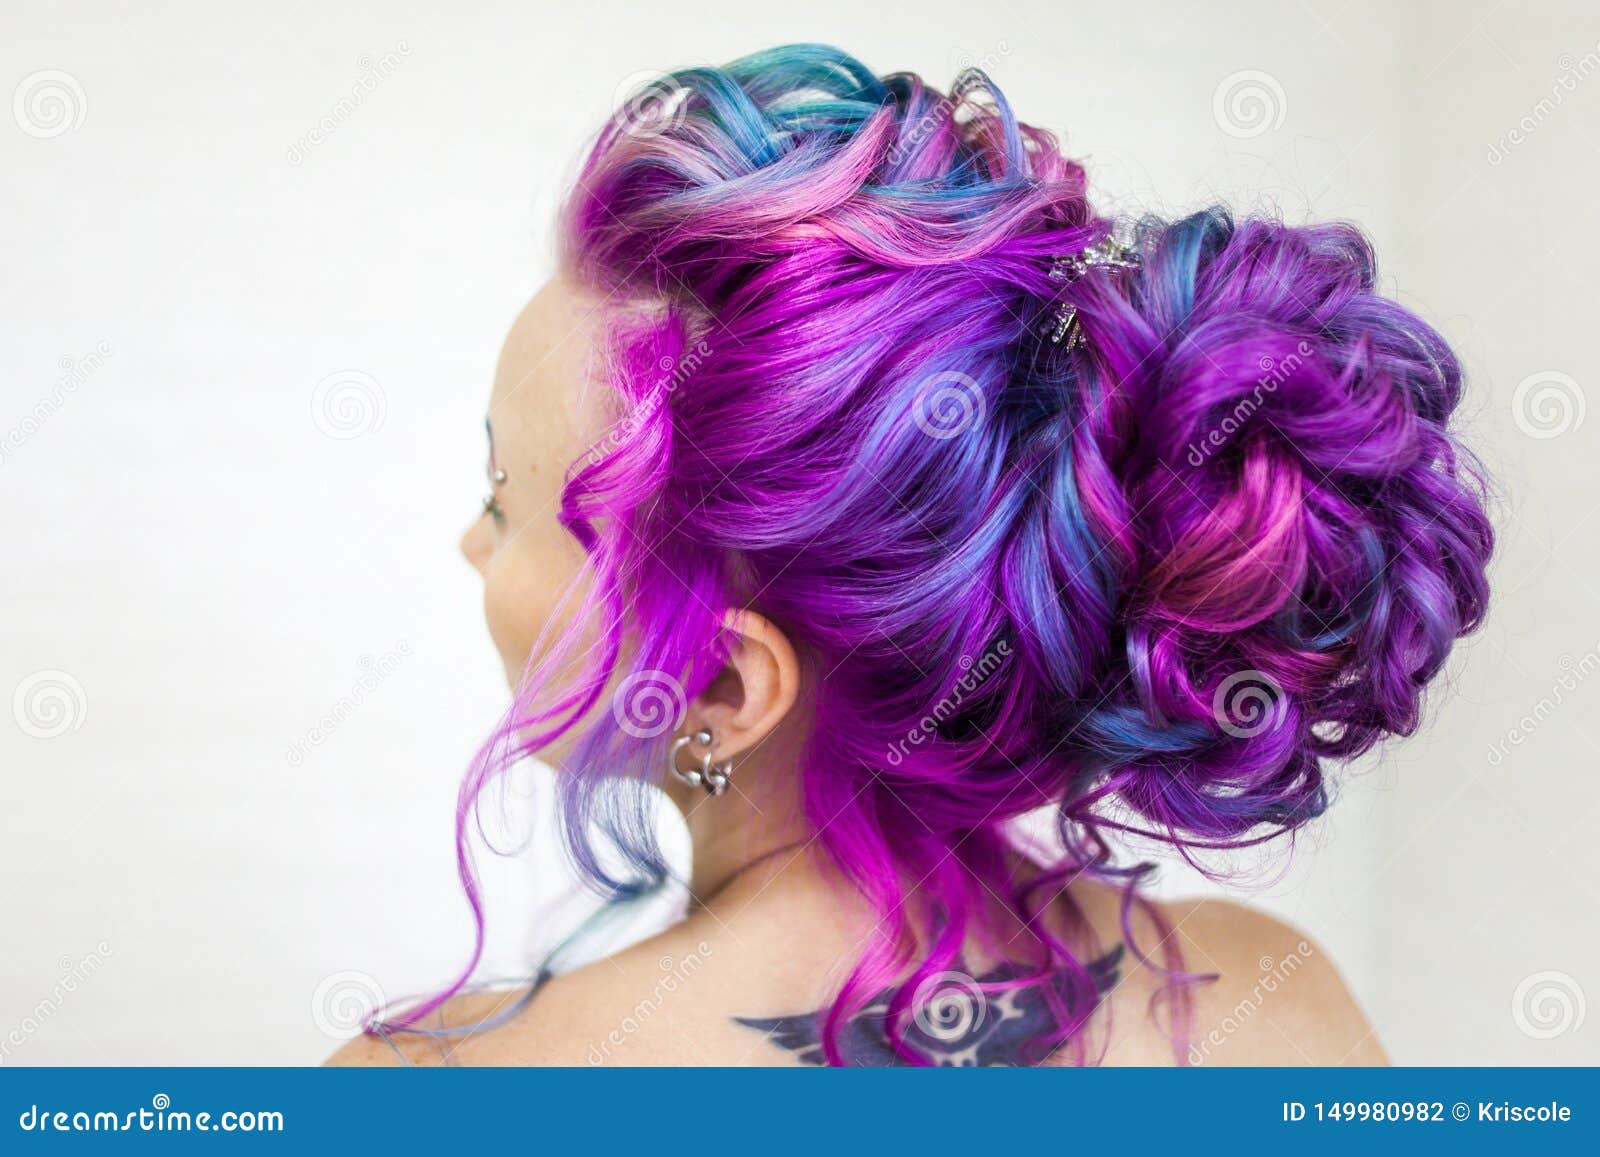 8. Magenta and Blue Hair Care Products - wide 2